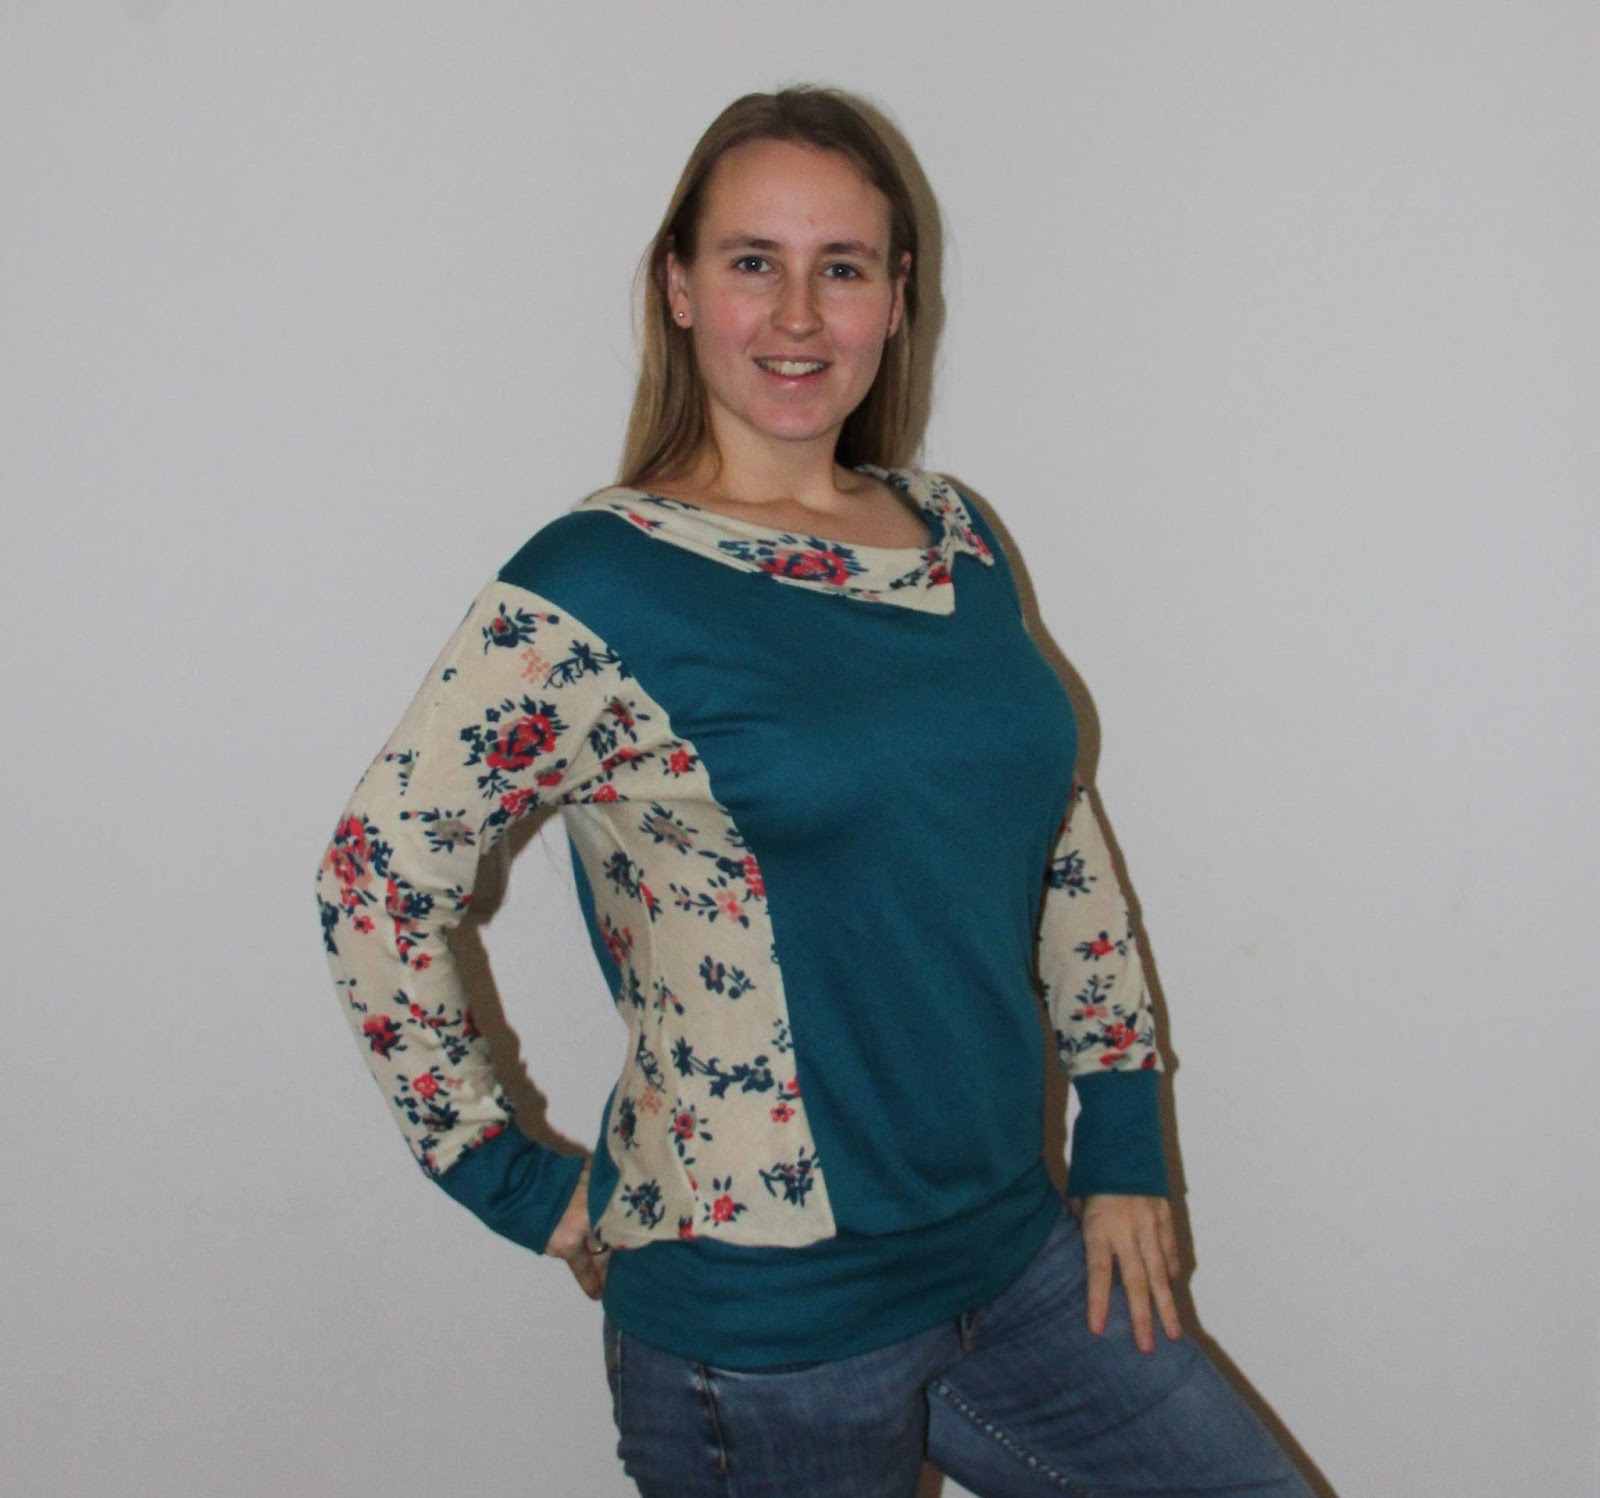 Inspinration: The Julia sweater for women